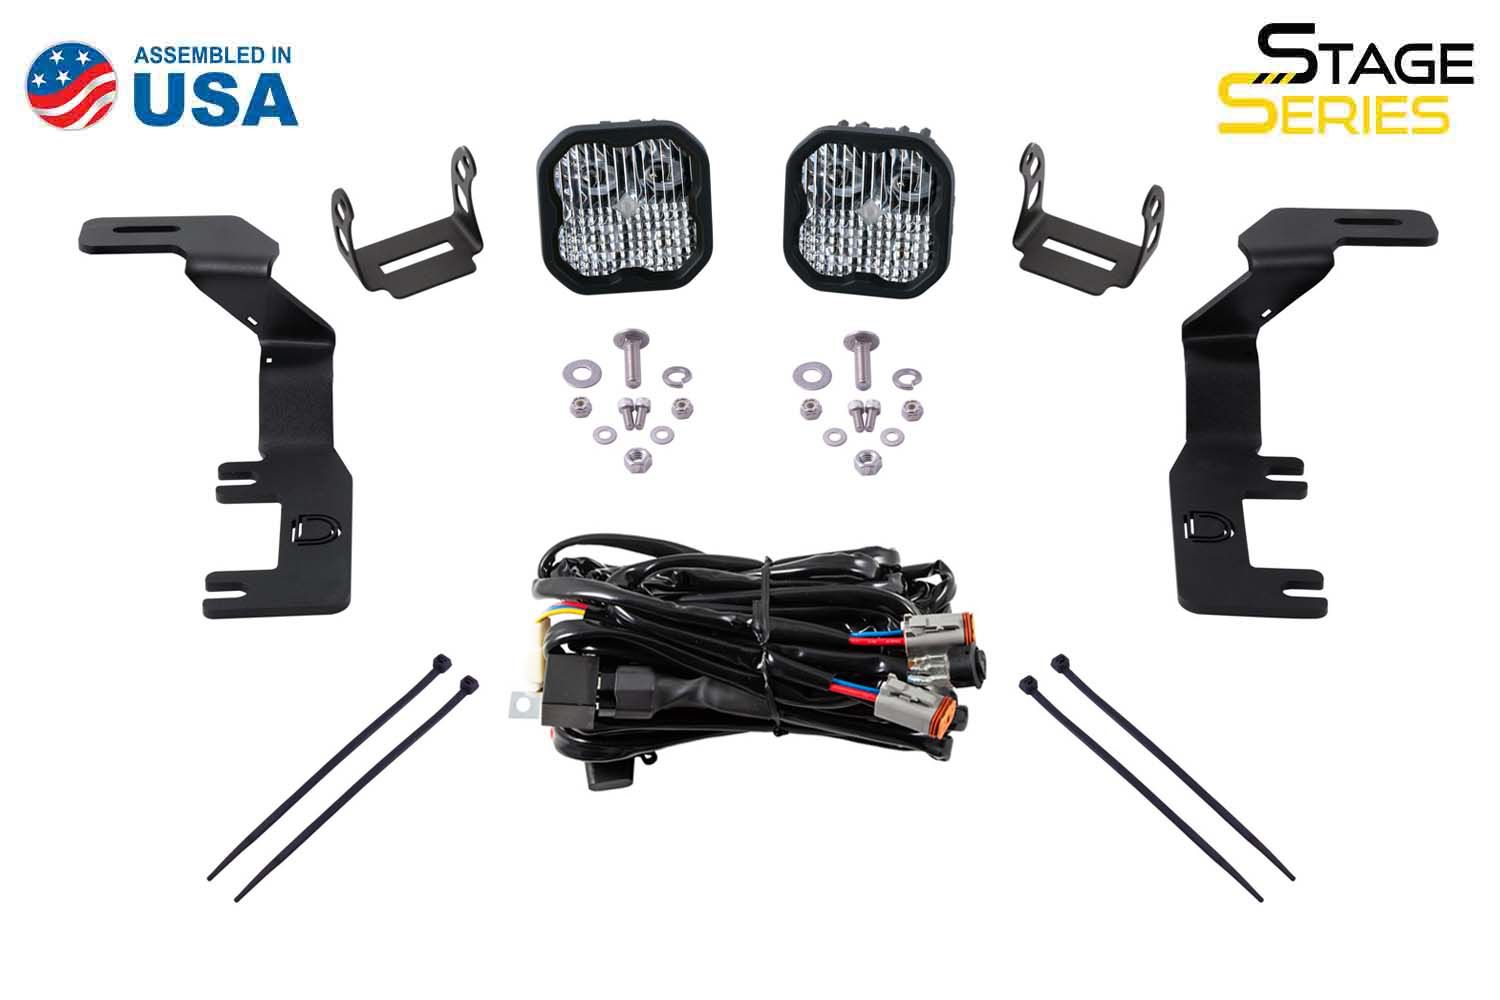 Stage Series Backlit Ditch Light Kit For 2015-2022 GMC Canyon